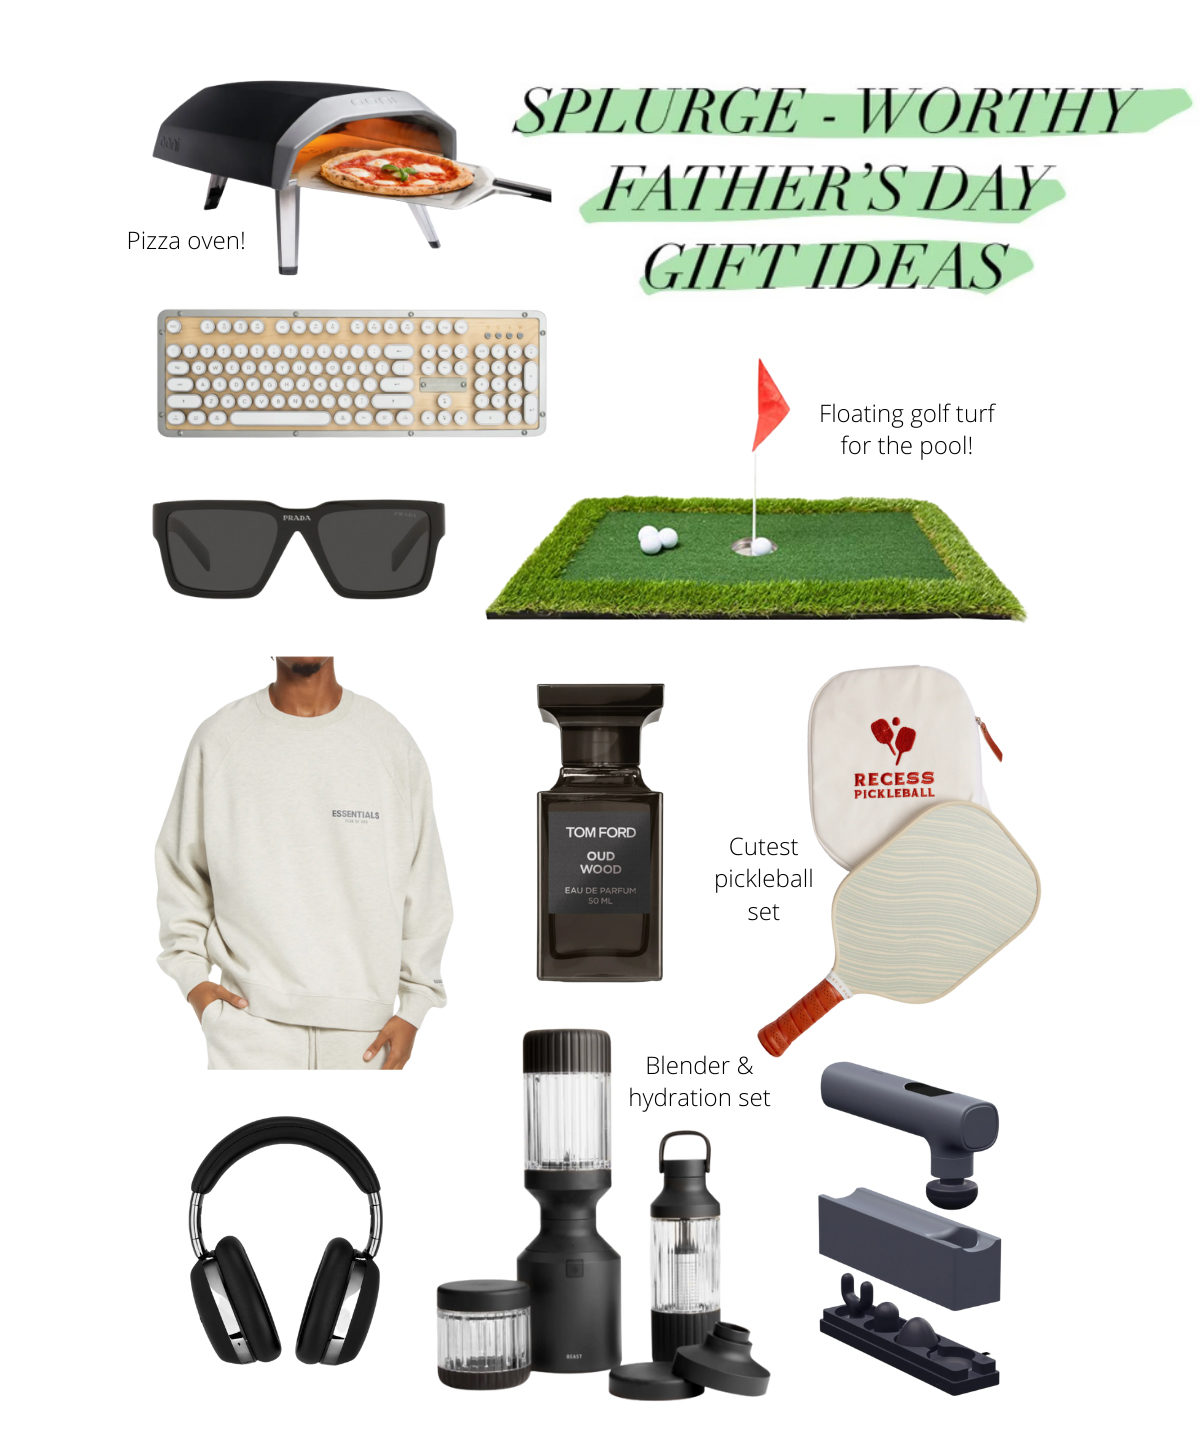 fathers day souvenir ideas, splurge-worthy gifts, fathers day, essentials sweatshirt, pizza oven, retro keyboard, floating golf turf, pickeball set, sunglasses, Tom Ford cologne, blender set, noise cancelling headphones, handheld massage gun